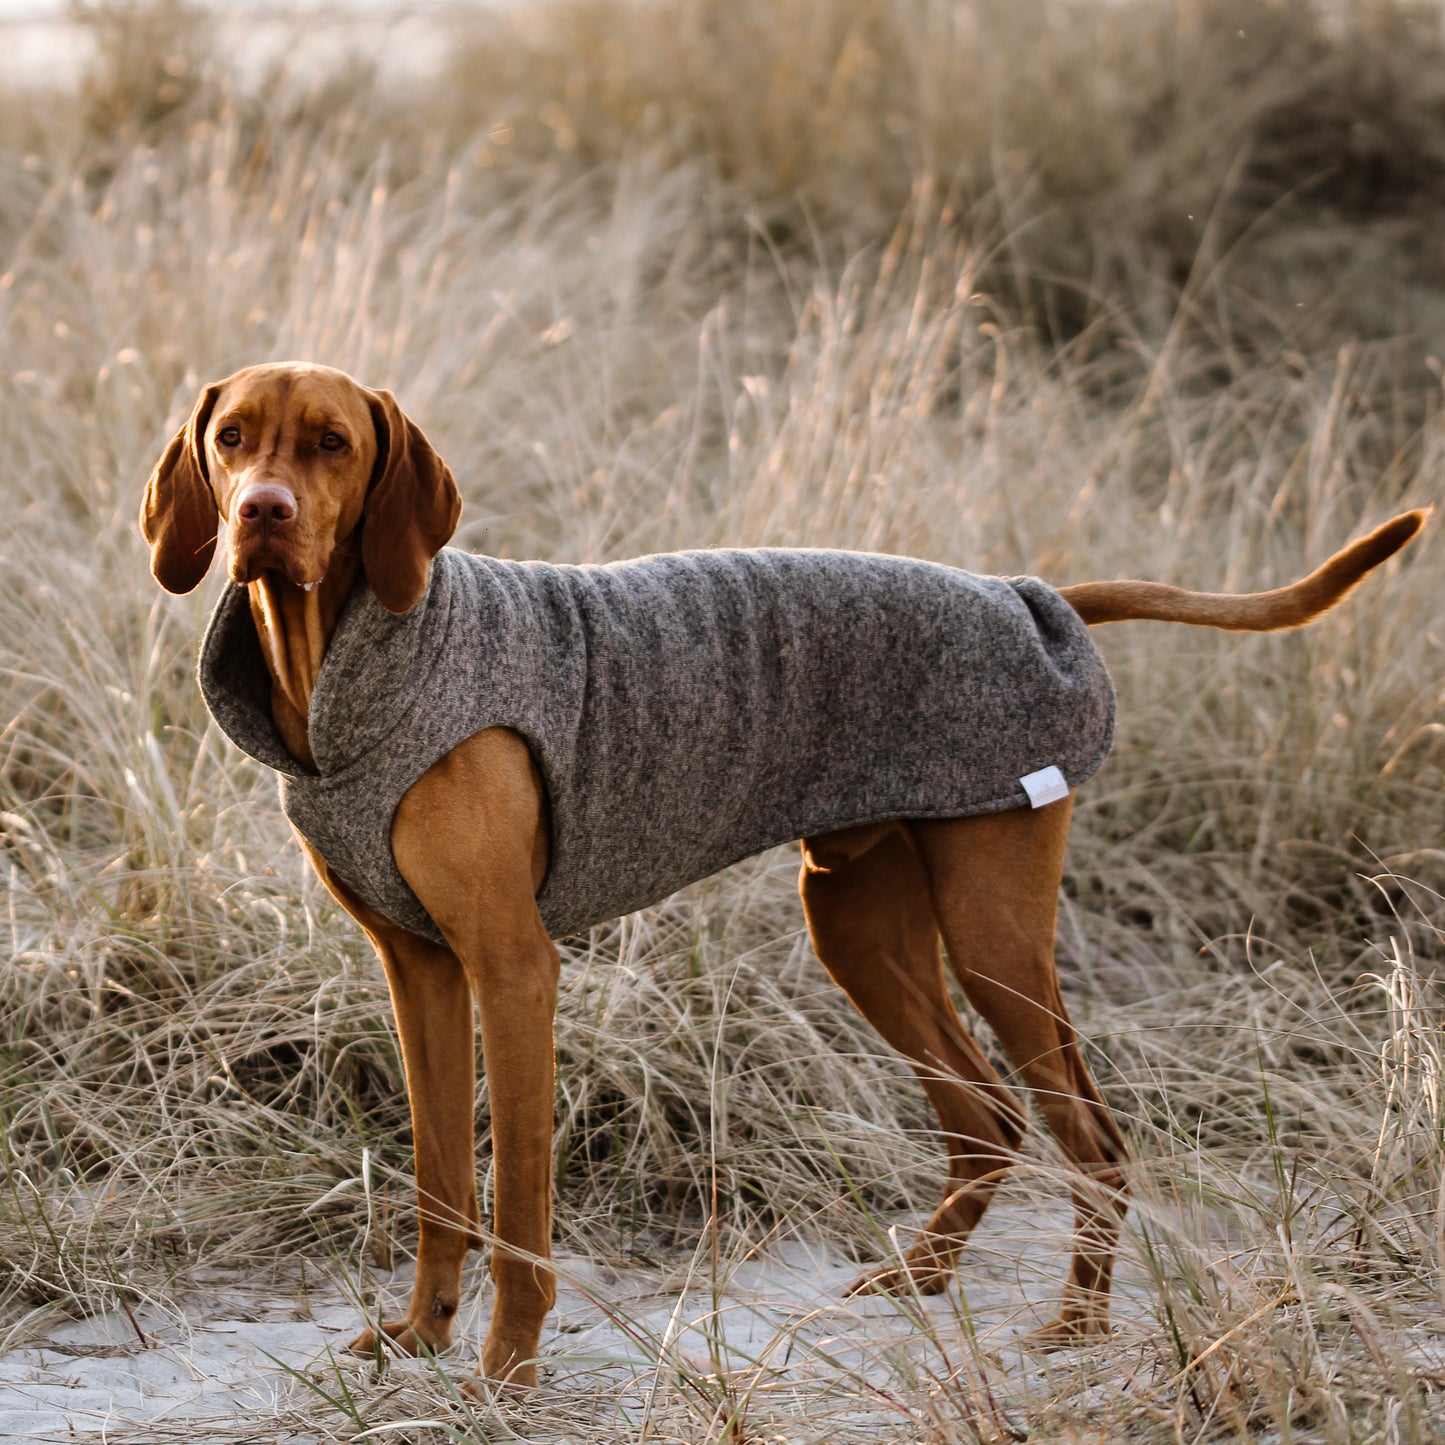 Hundepullover CosyShirt stay warm taupe meliert